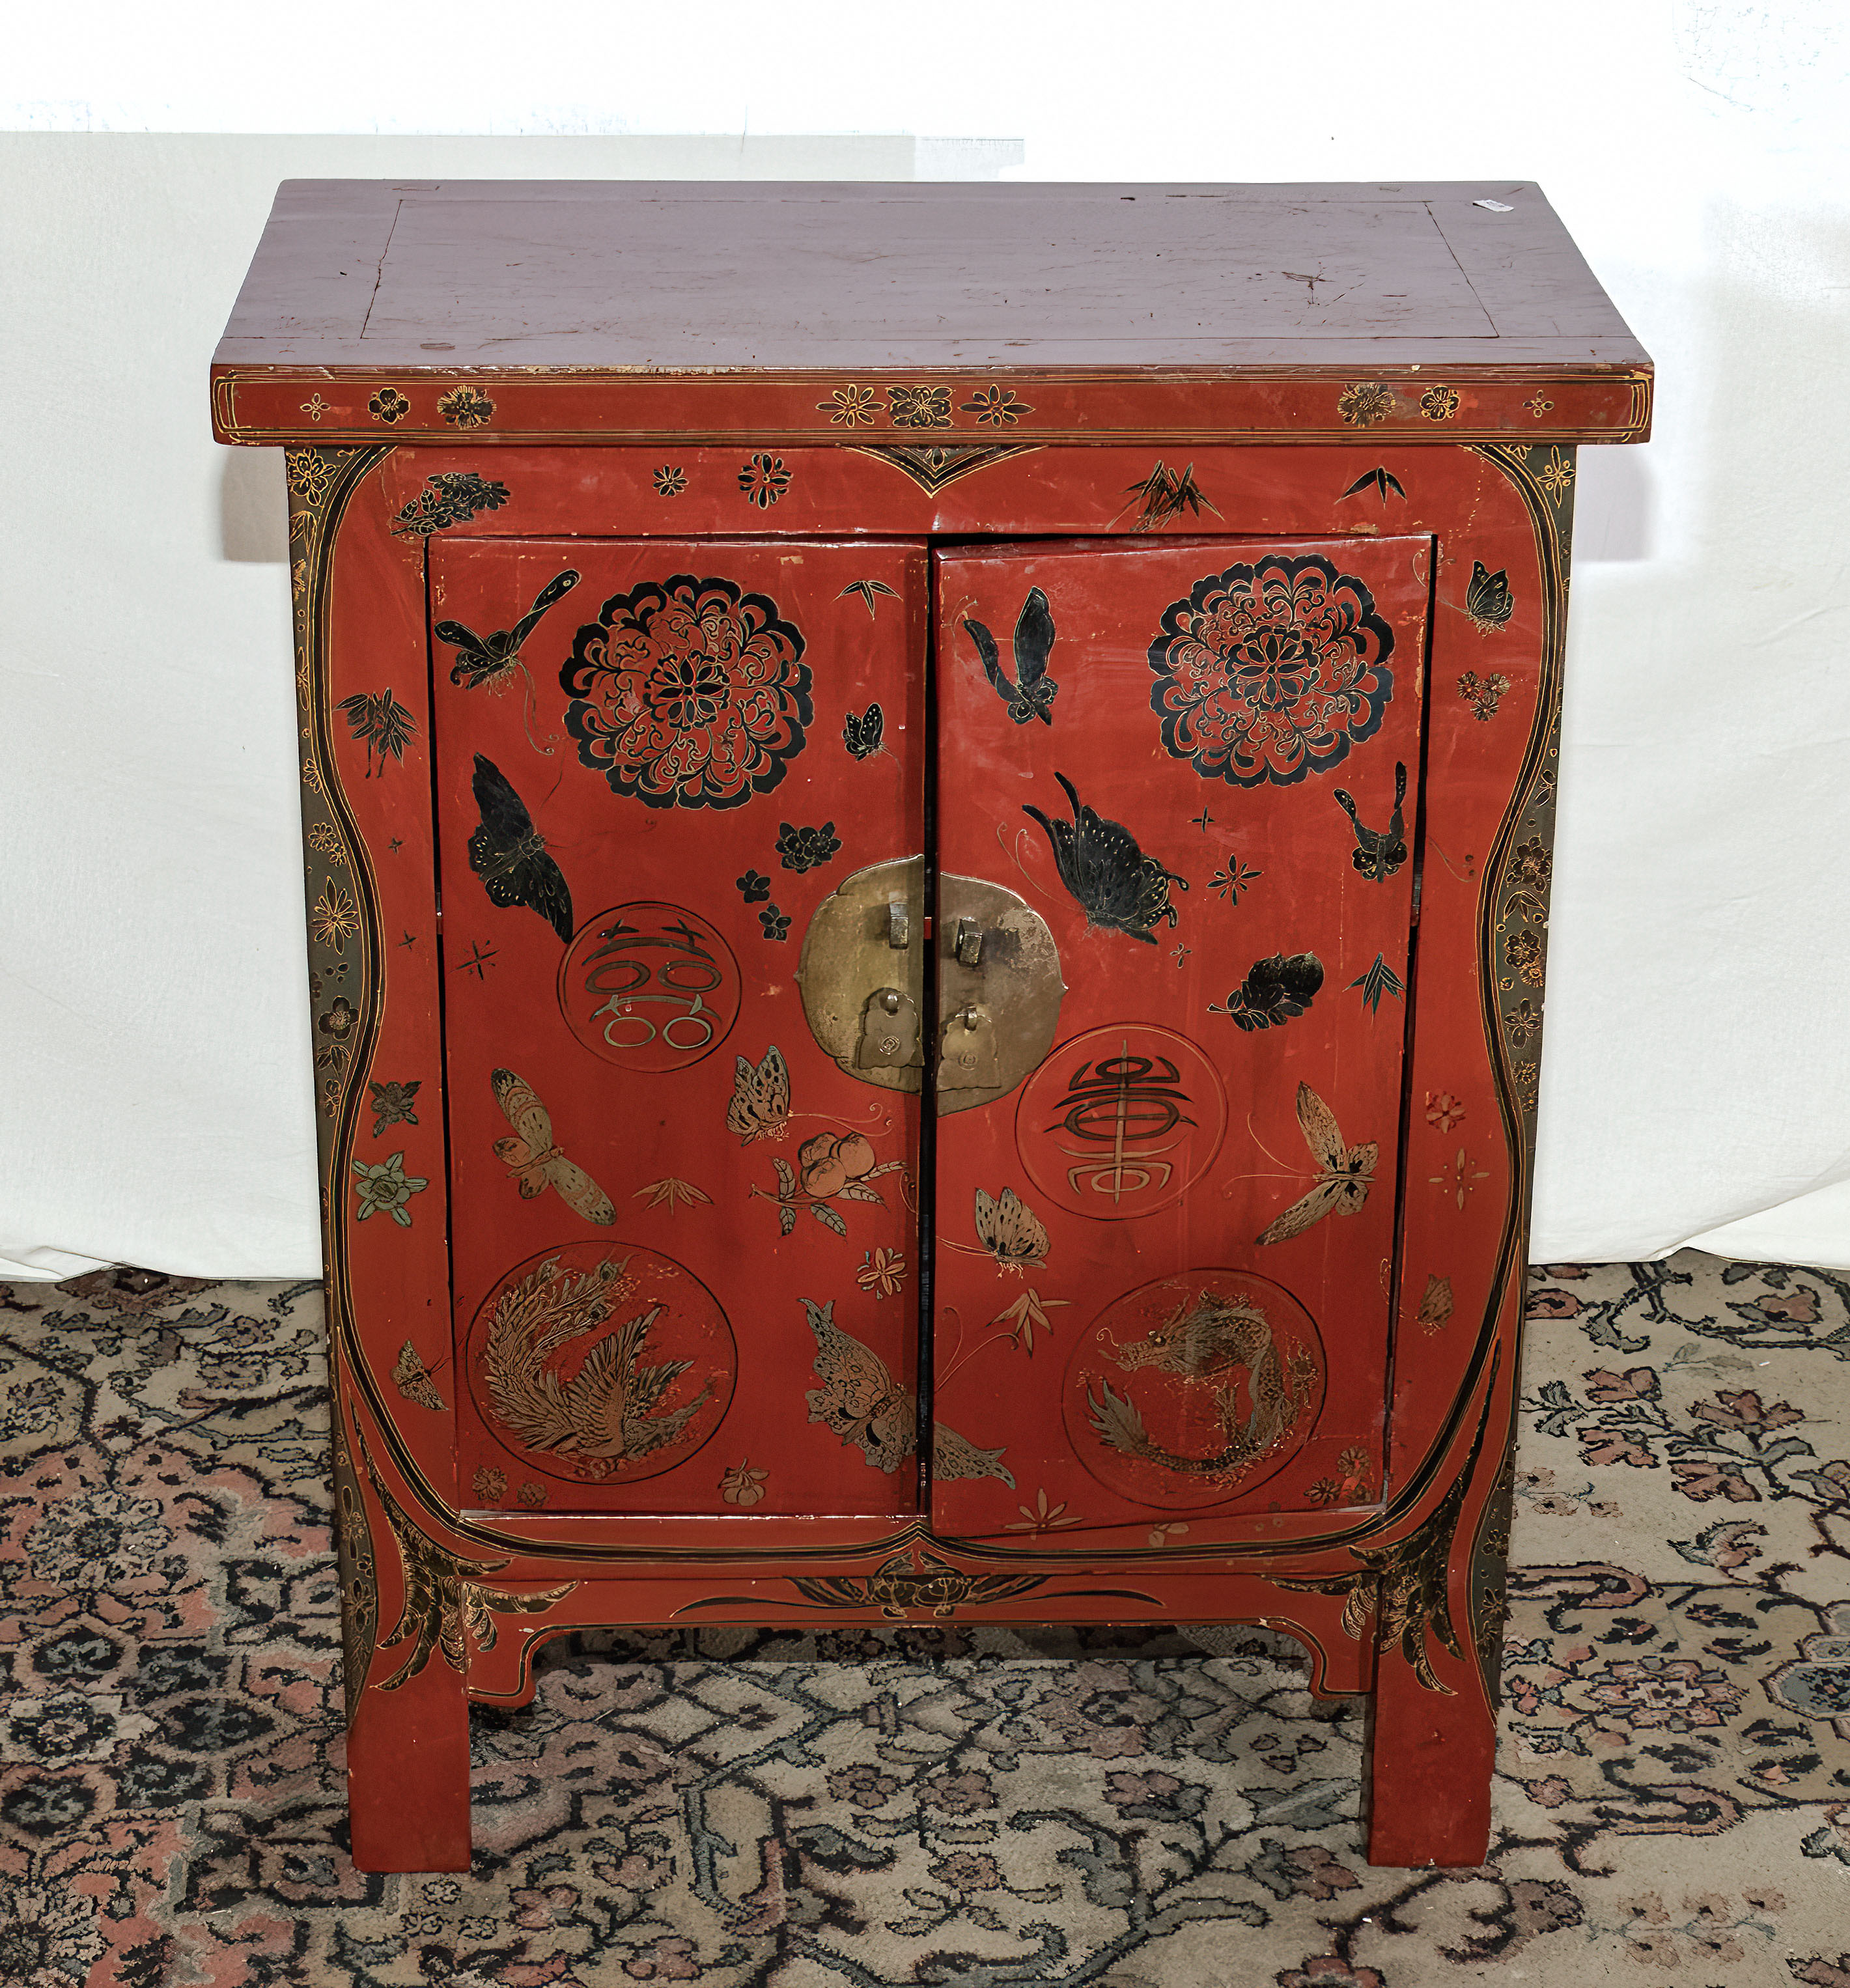 Chinese red lacquer marriage chest 1930's hand painted, 62cm wide x 78cm tall x 36cm deep